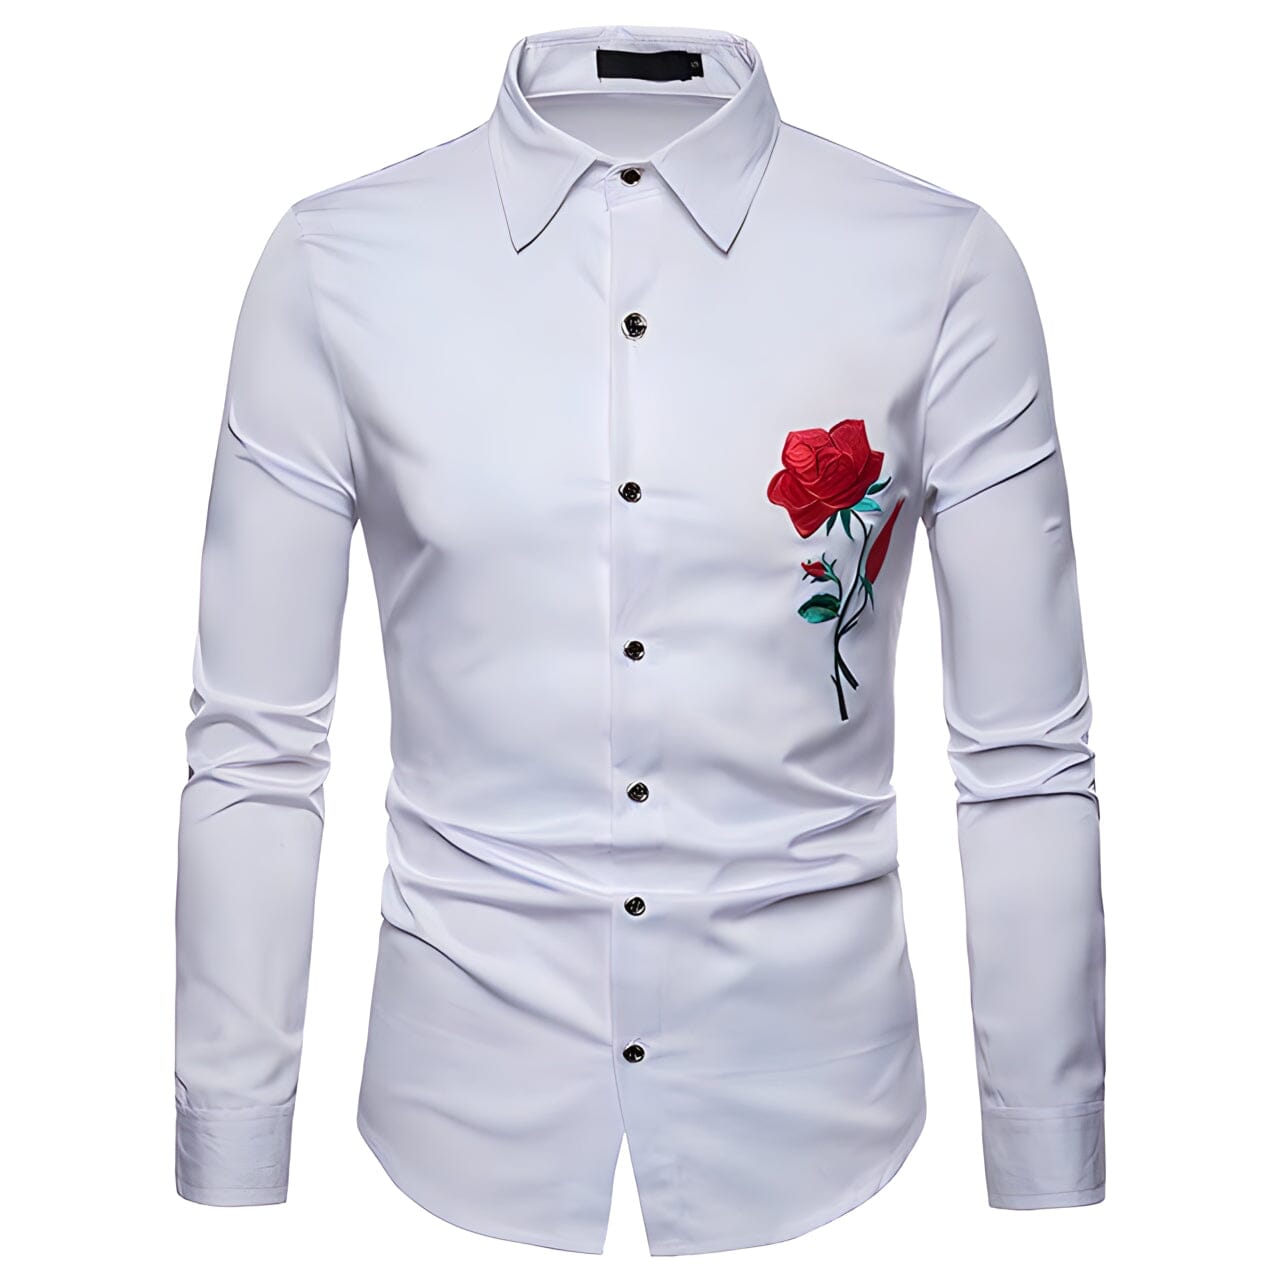 The Blossom Embroidered Long Sleeve Shirt - Multiple Colors Shop5798684 Store White S 